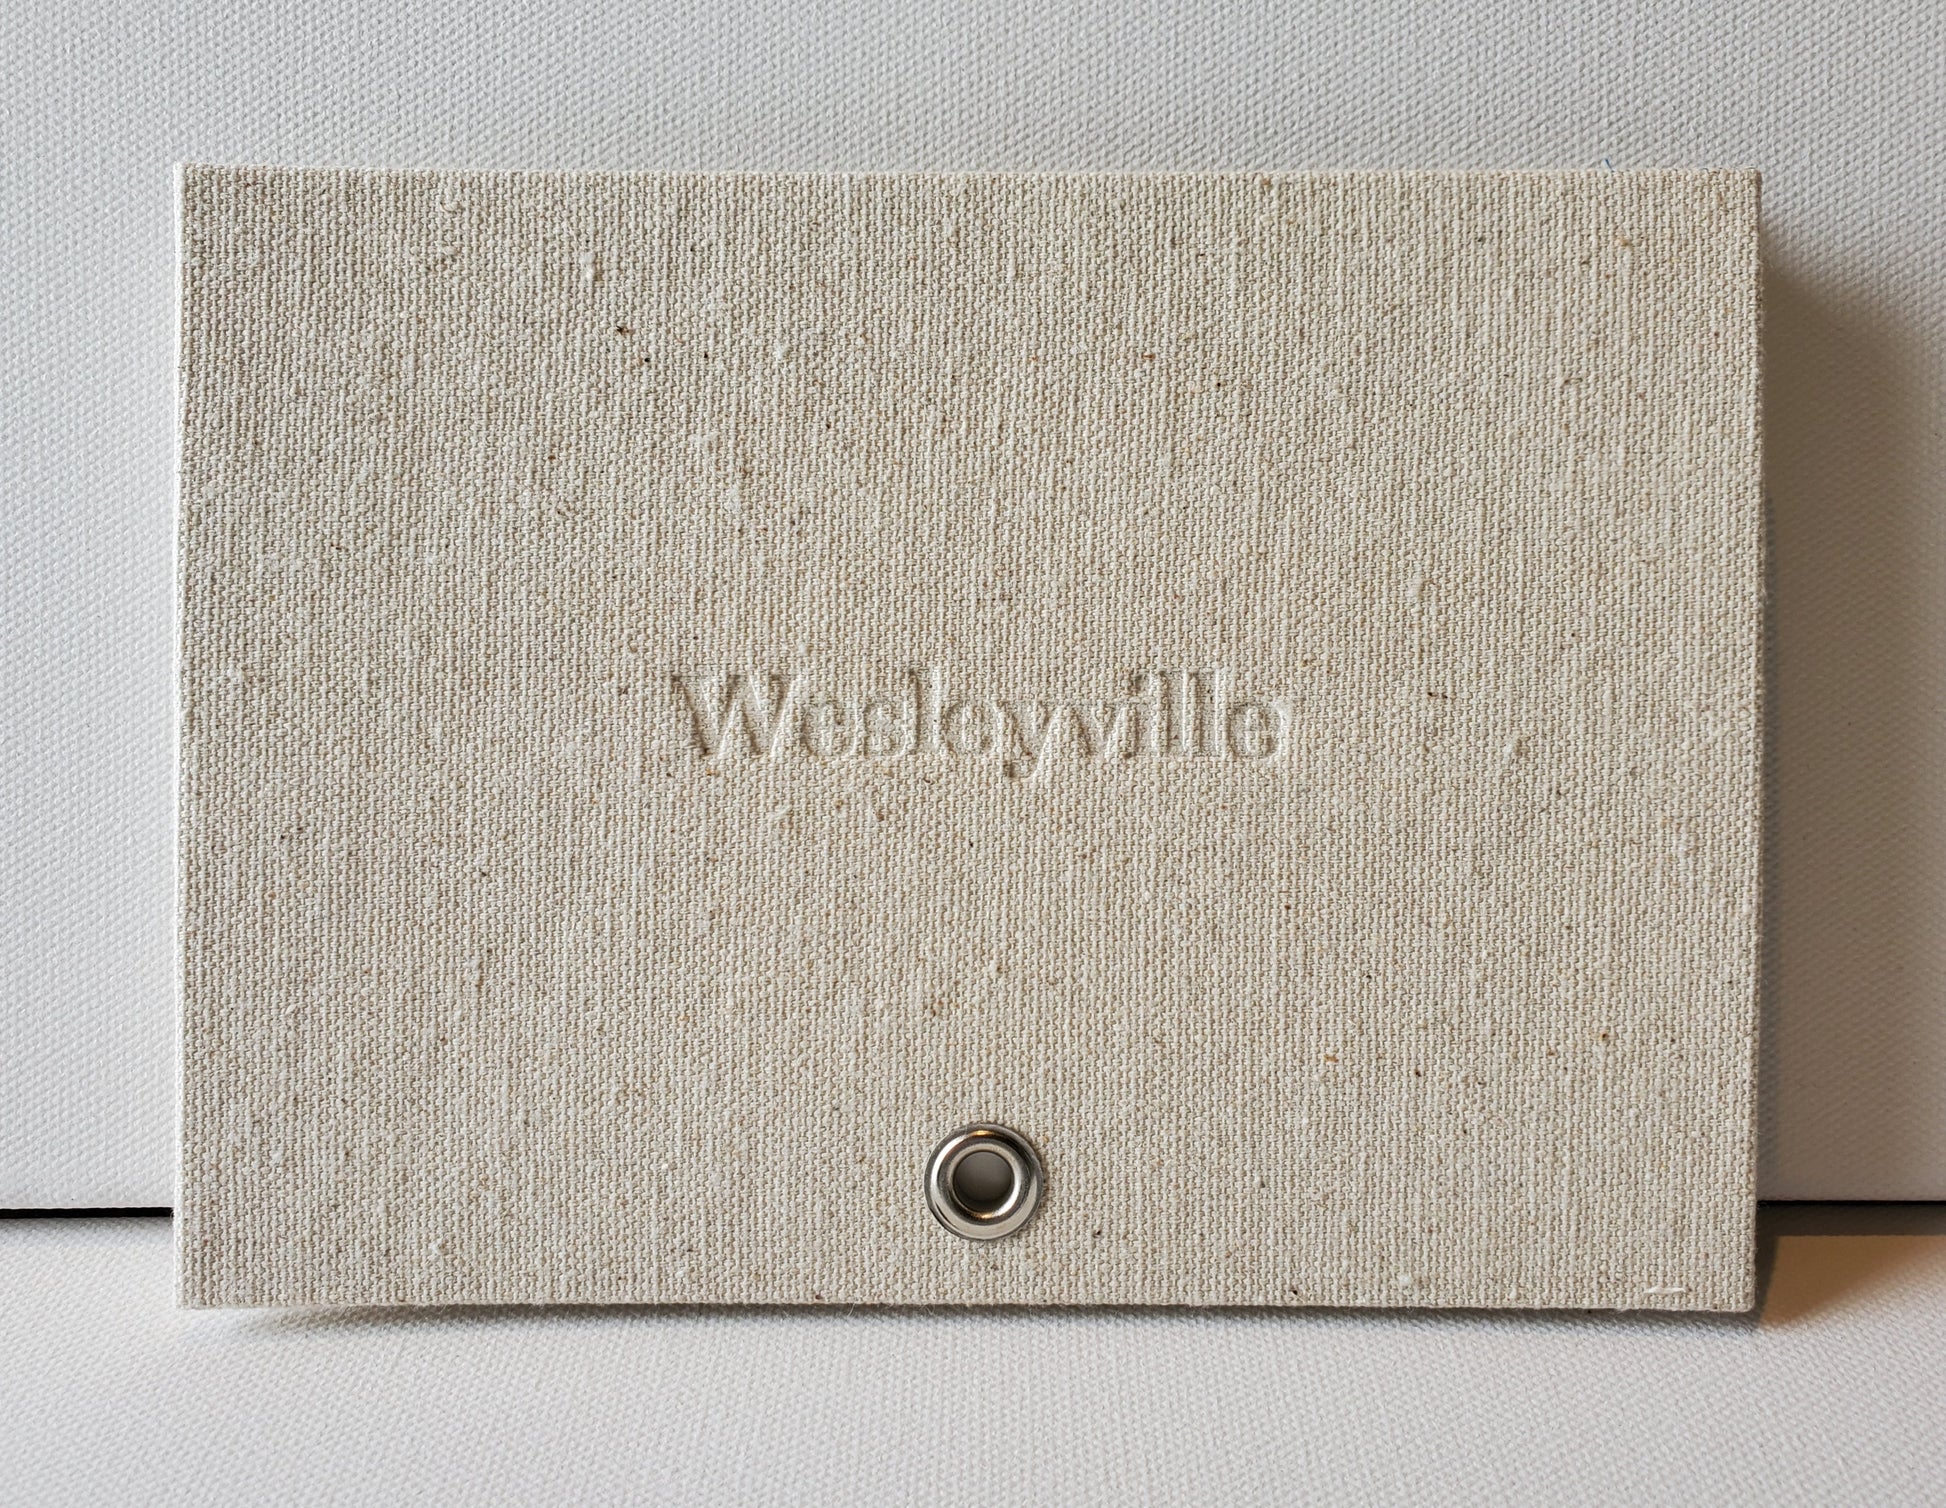 Wesleyville book front cover: sailcloth & grommet